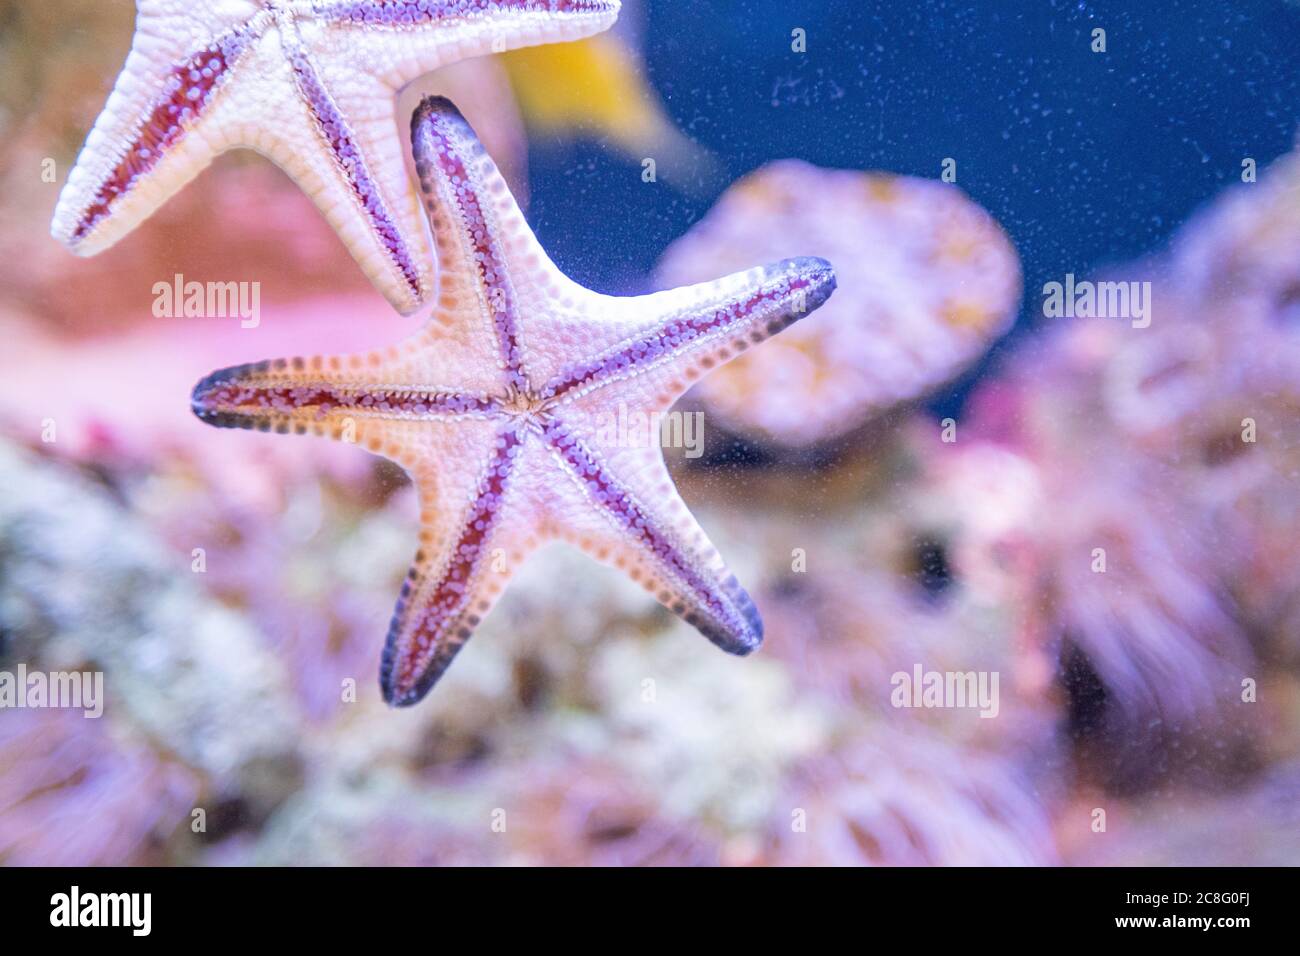 Close up of the underside of a colorful orange sea star (starfish, star fish) in a marine coral reef tank aquarium, as it crawls across the glass. Stock Photo